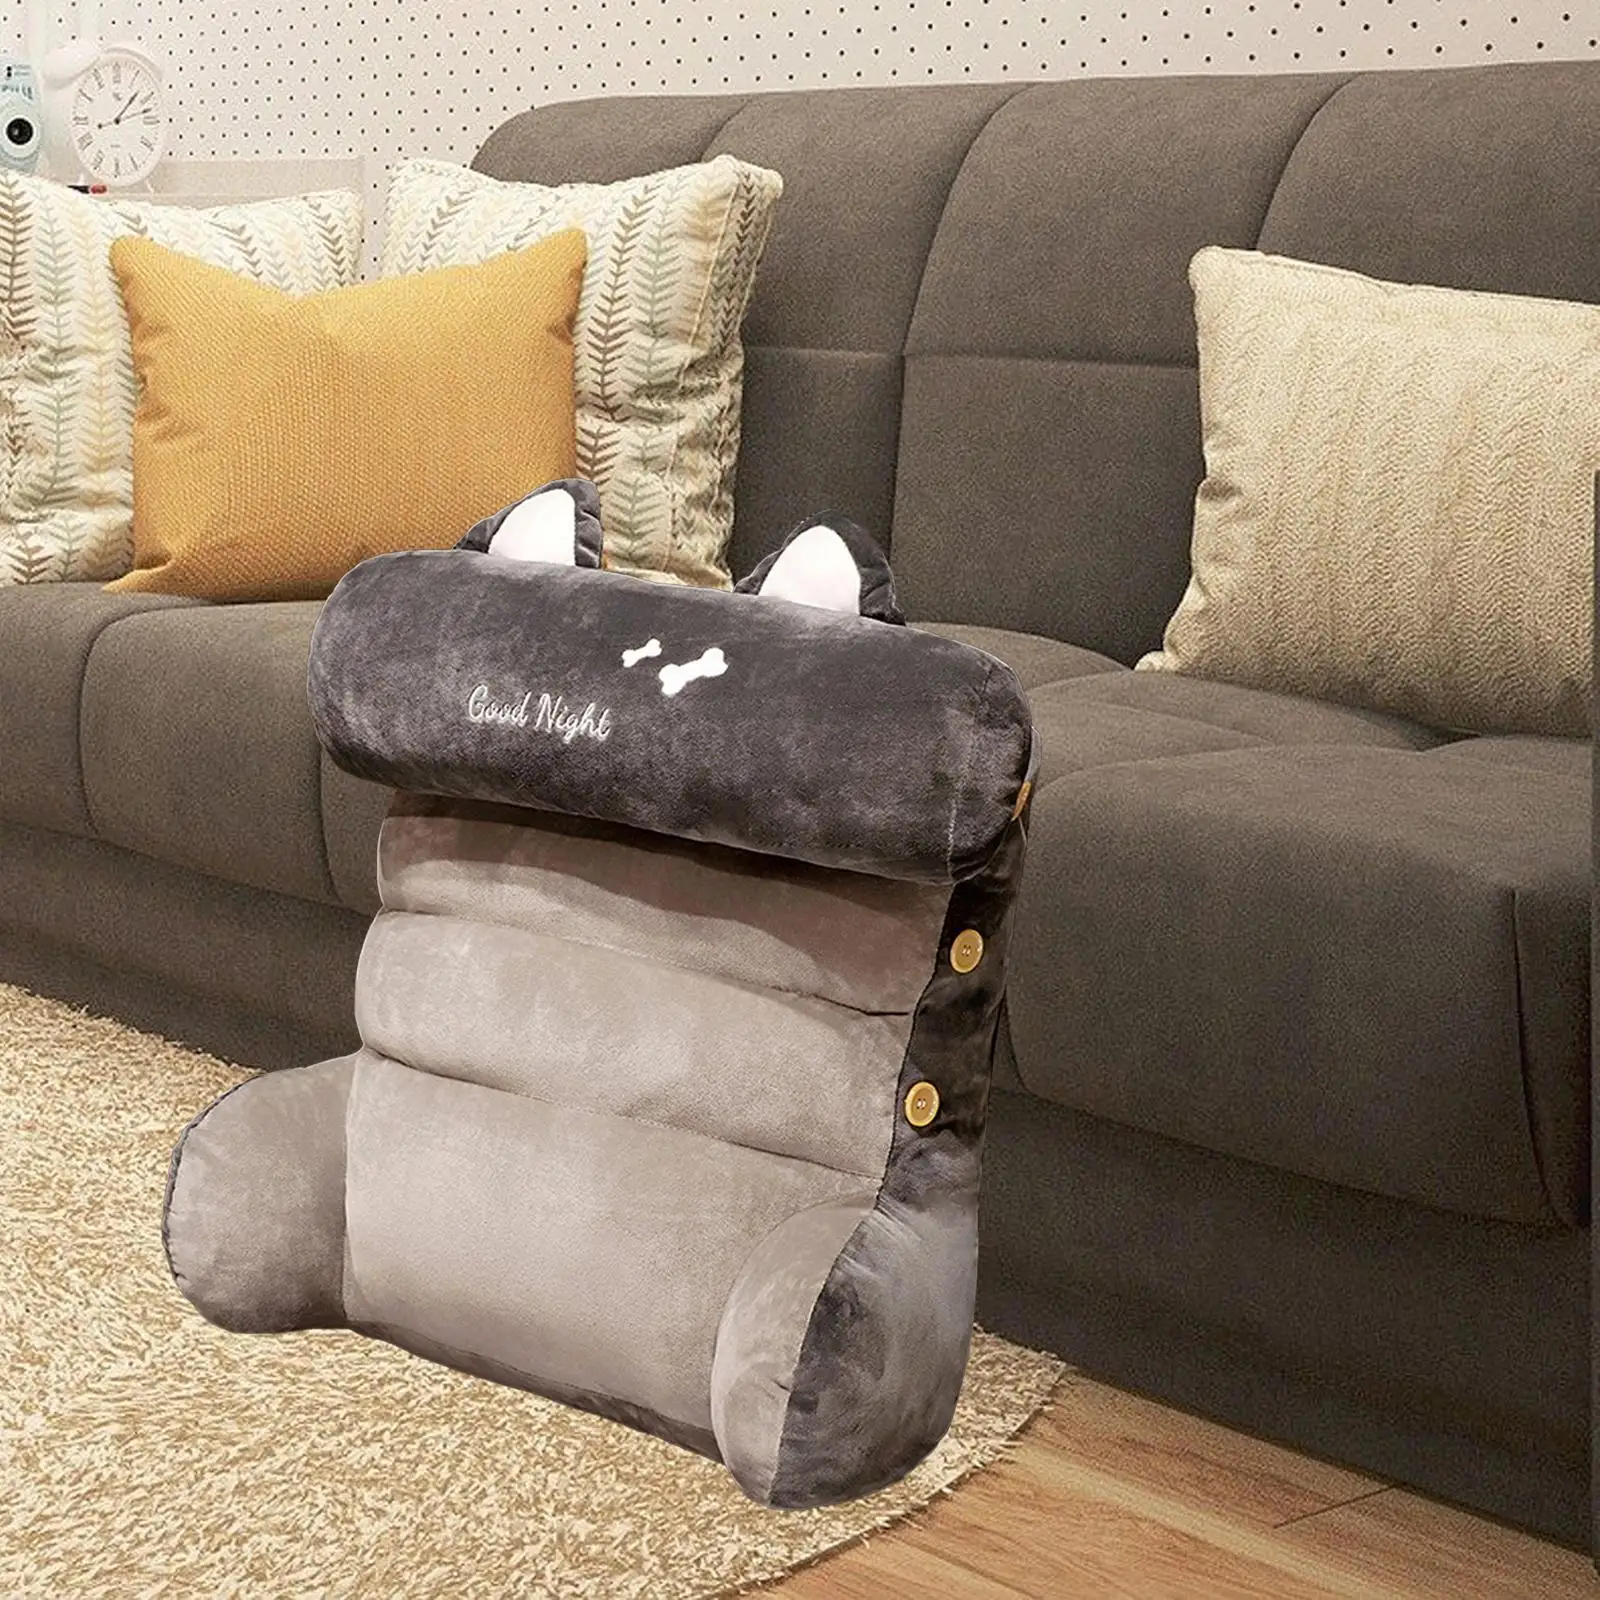 Plush Backrest Pillow waist Support Cushion with Arms and Pockets Chair Cushion for Computer Chair Bedroom Sofa